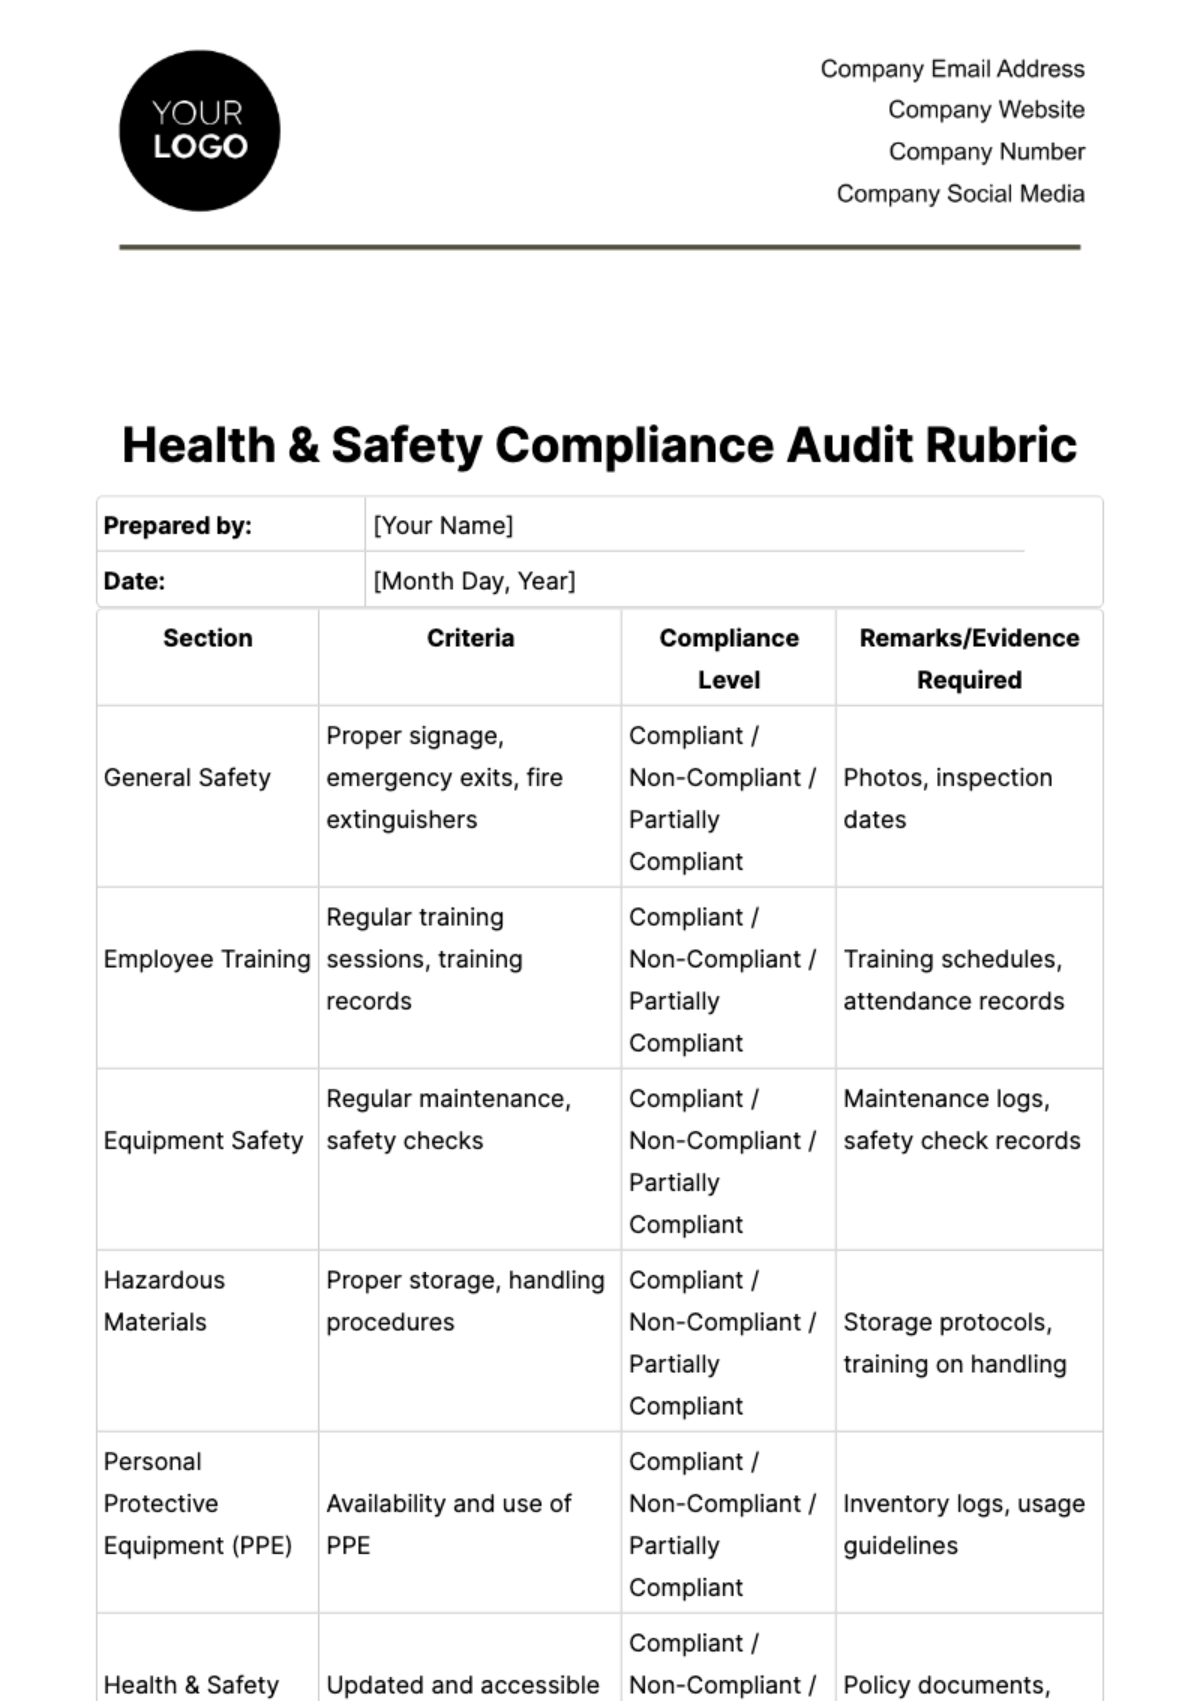 Free Health & Safety Compliance Audit Rubric Template